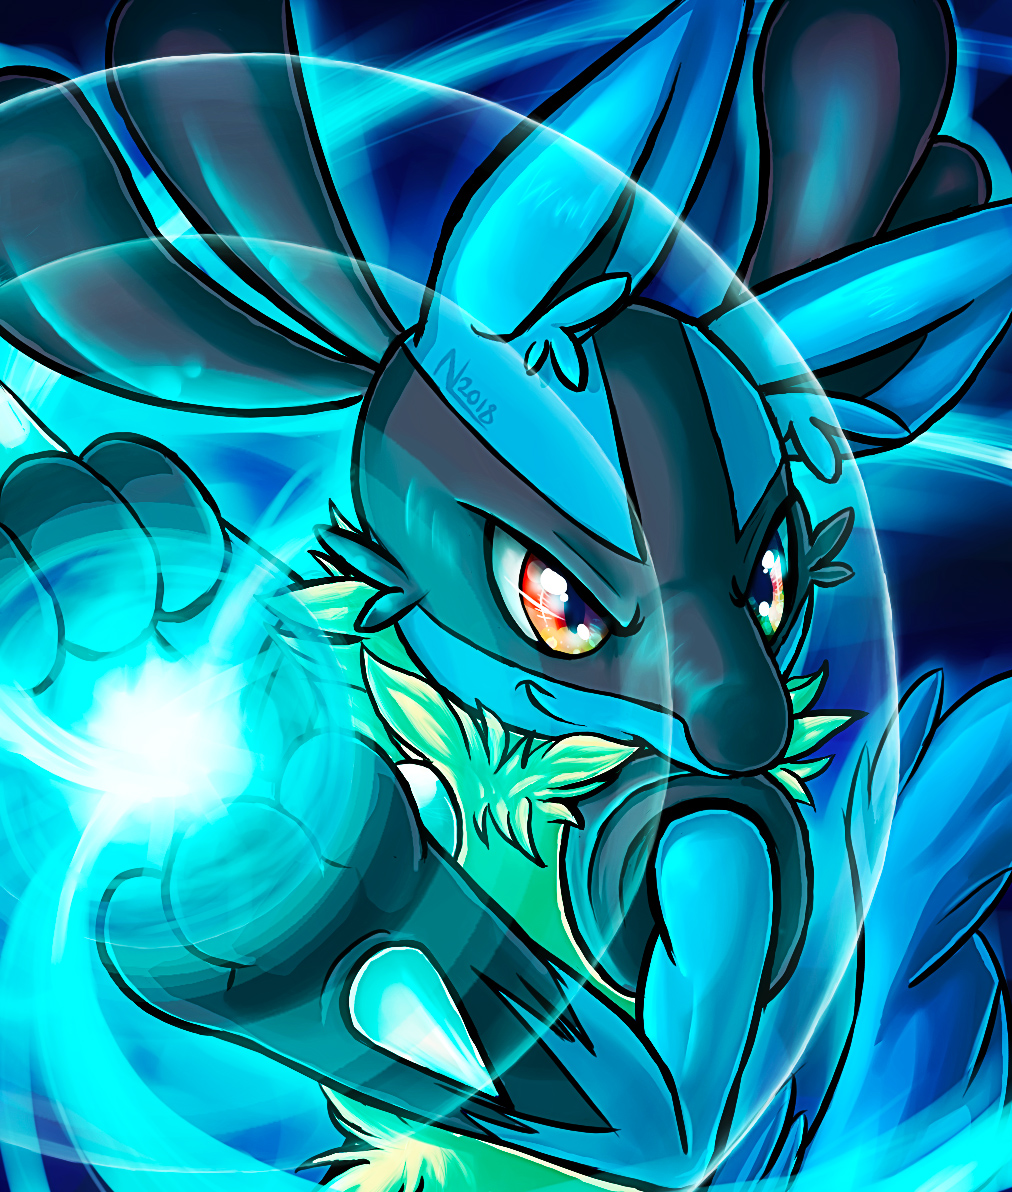 Lucario Print - new finished - vibrant.jpg